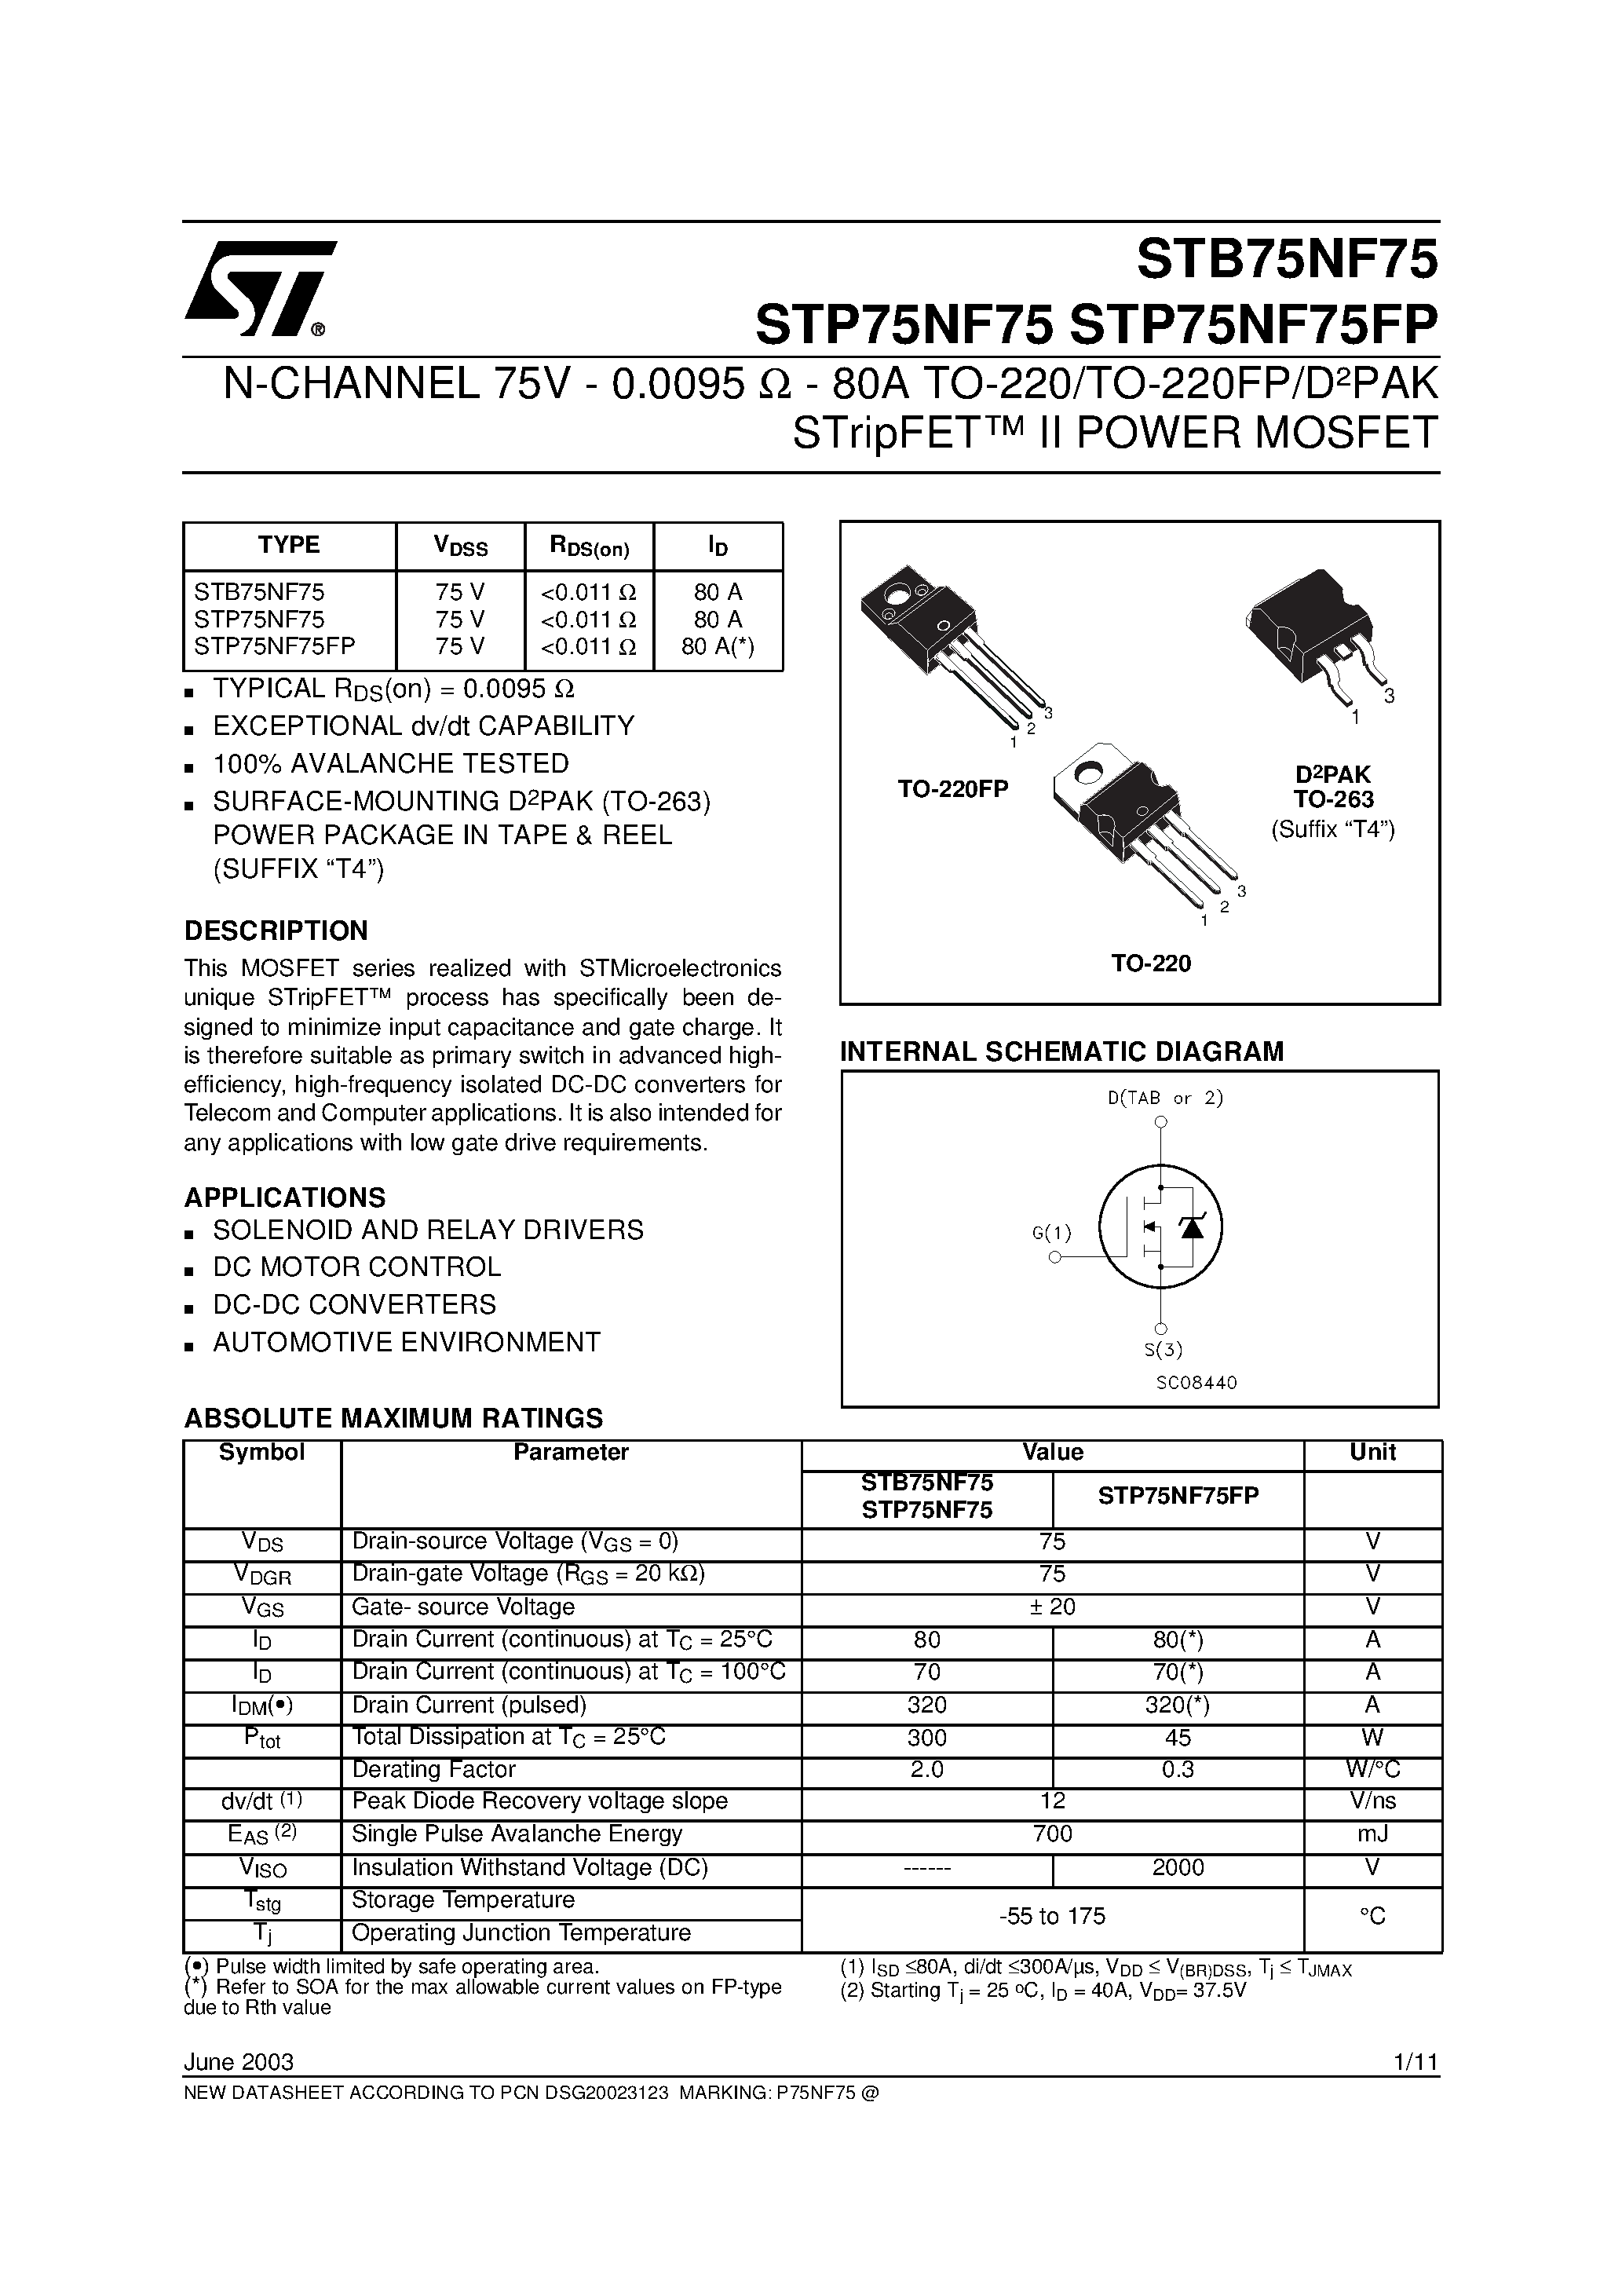 Datasheet STB75NF75 - N-CHANNEL MOSFET page 1